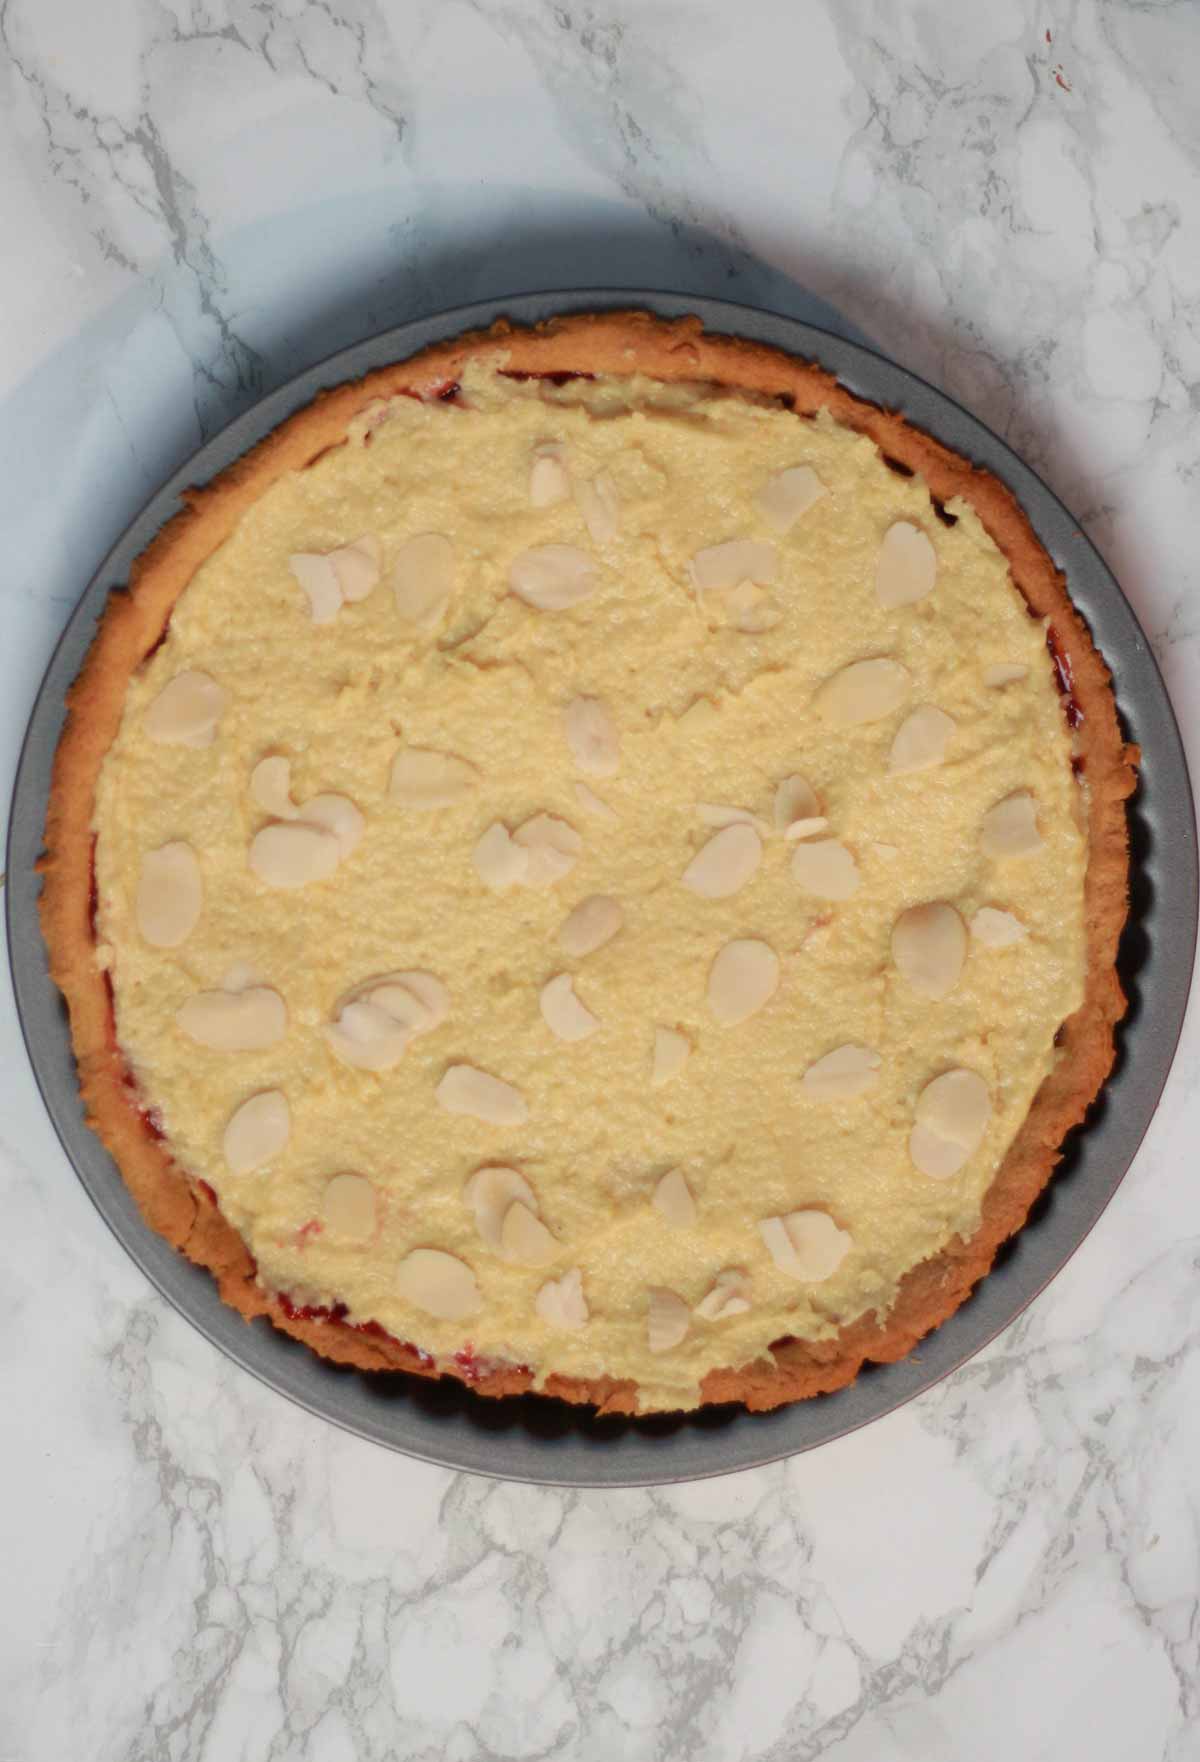 Tart With Filling And Flaked Almonds On Top